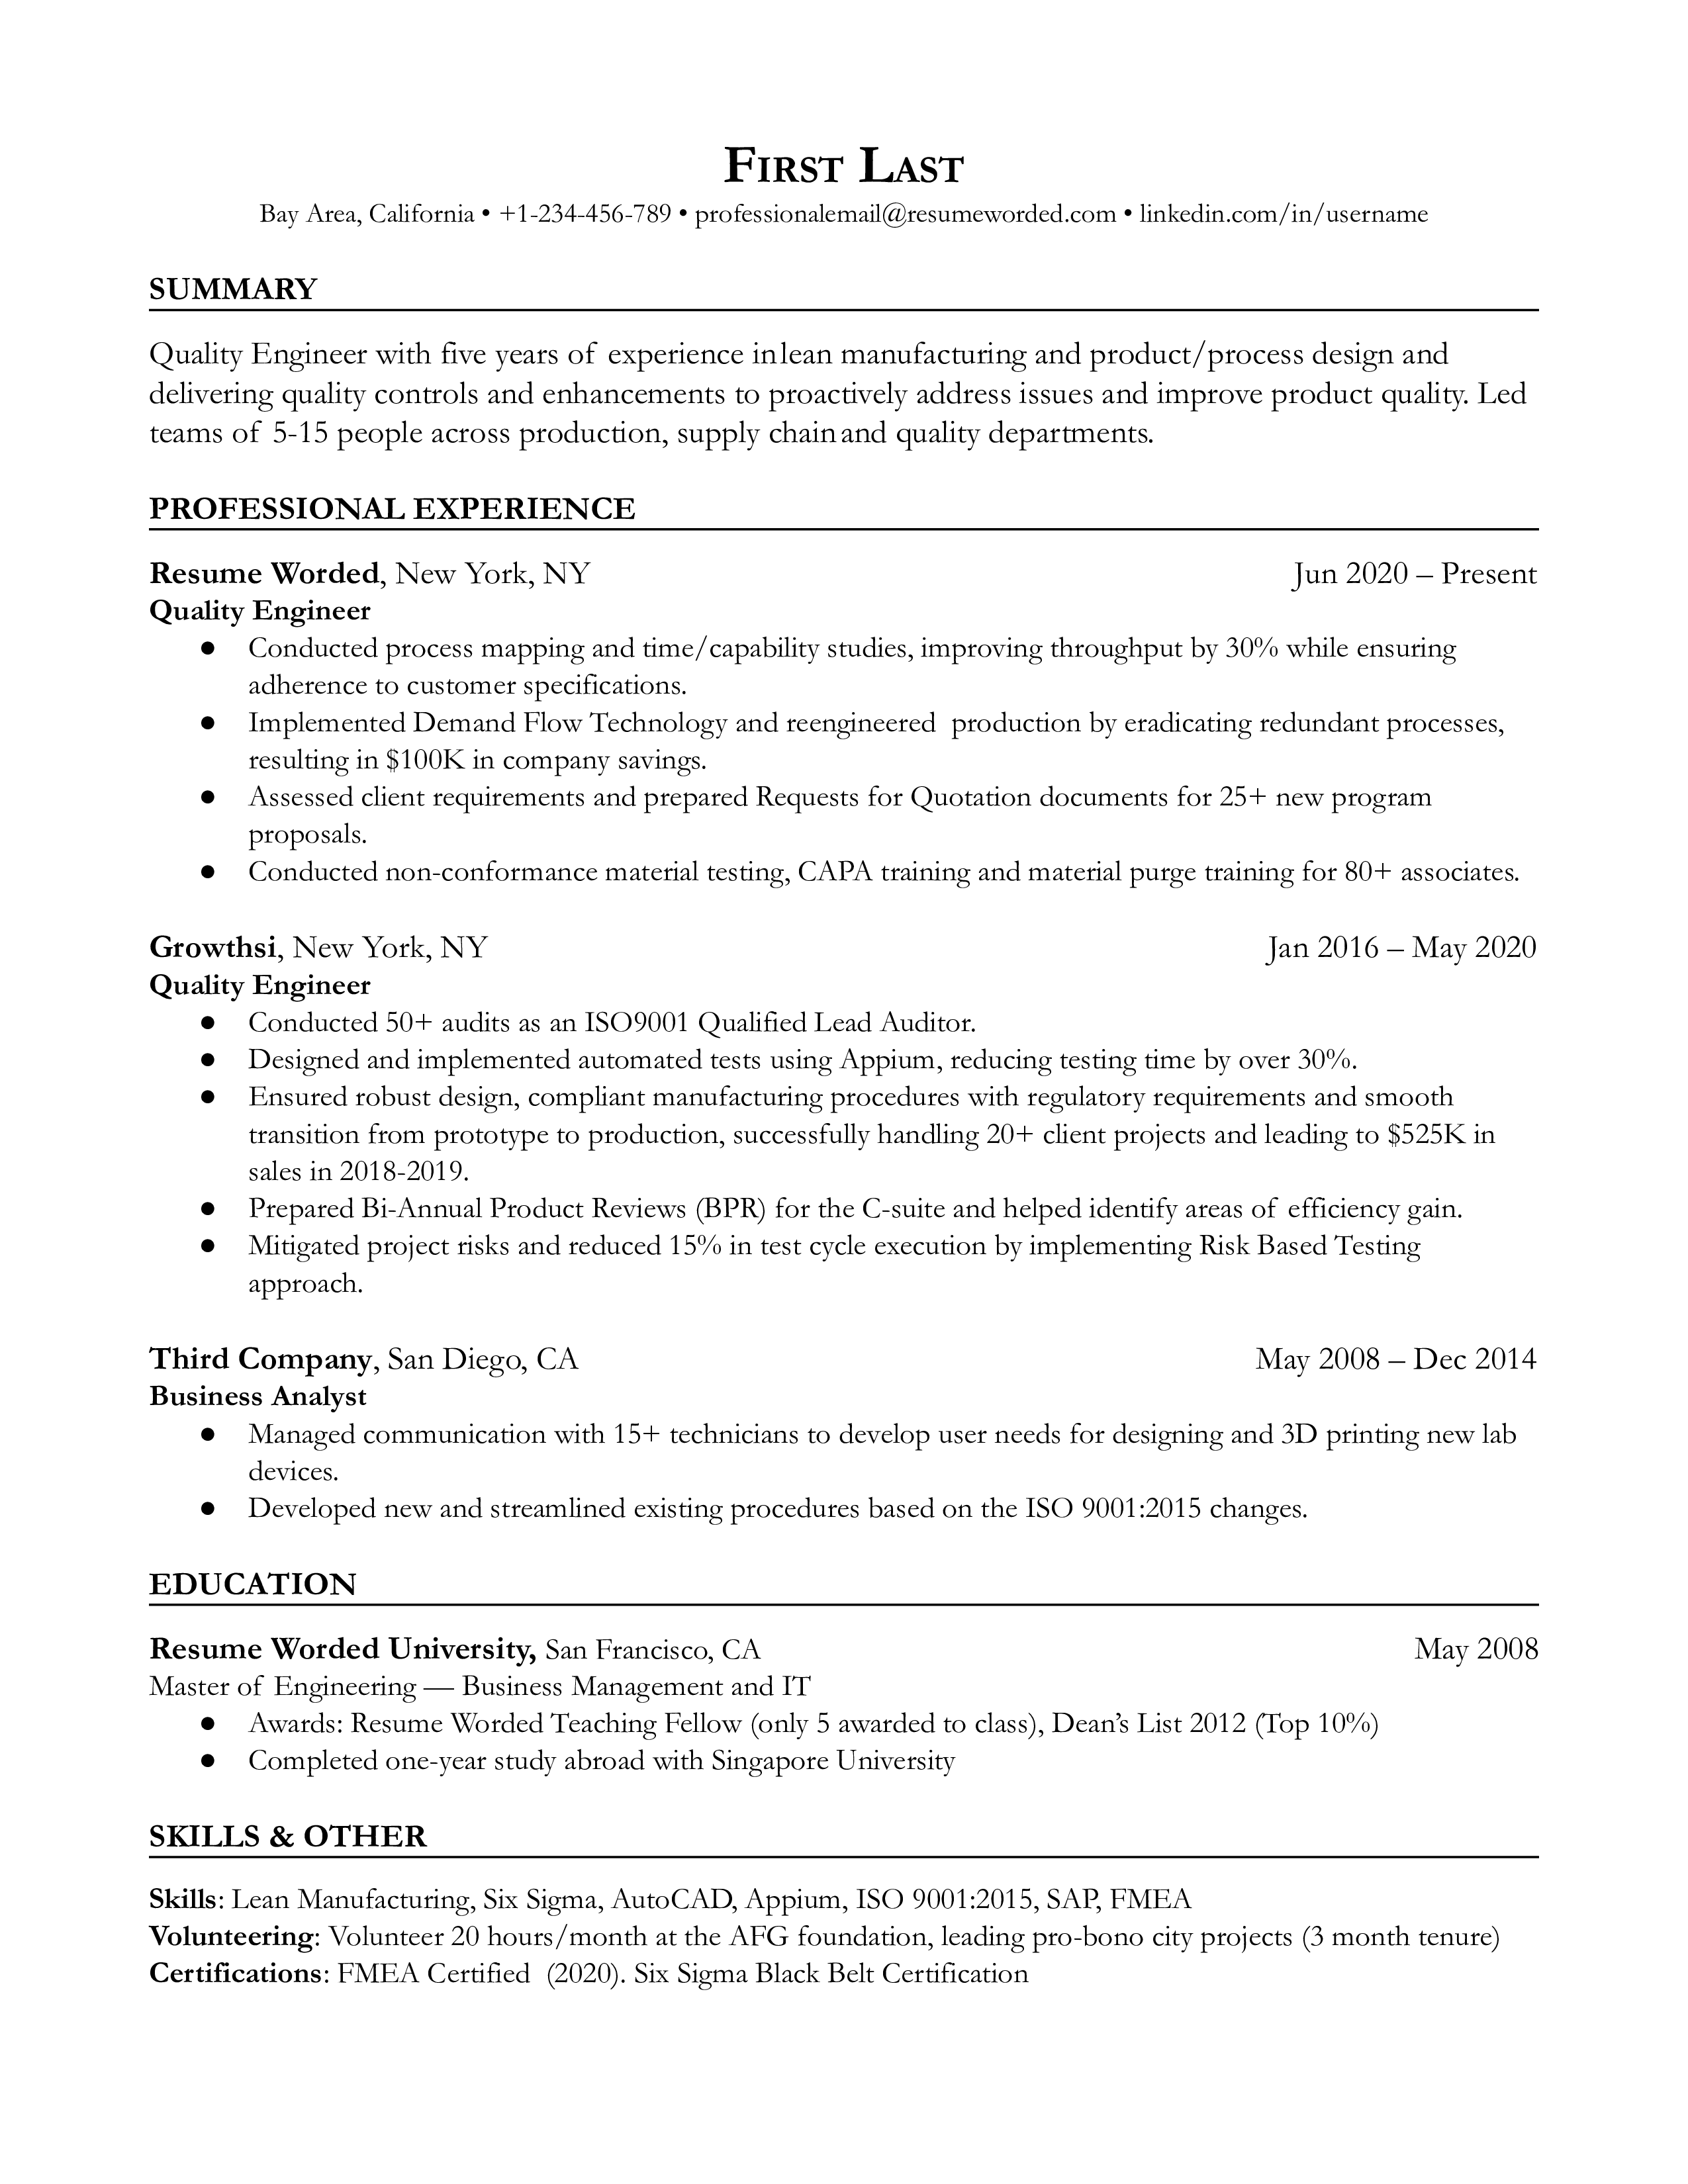 Quality Engineer resume example in 2022 and tips and trends for job hunters